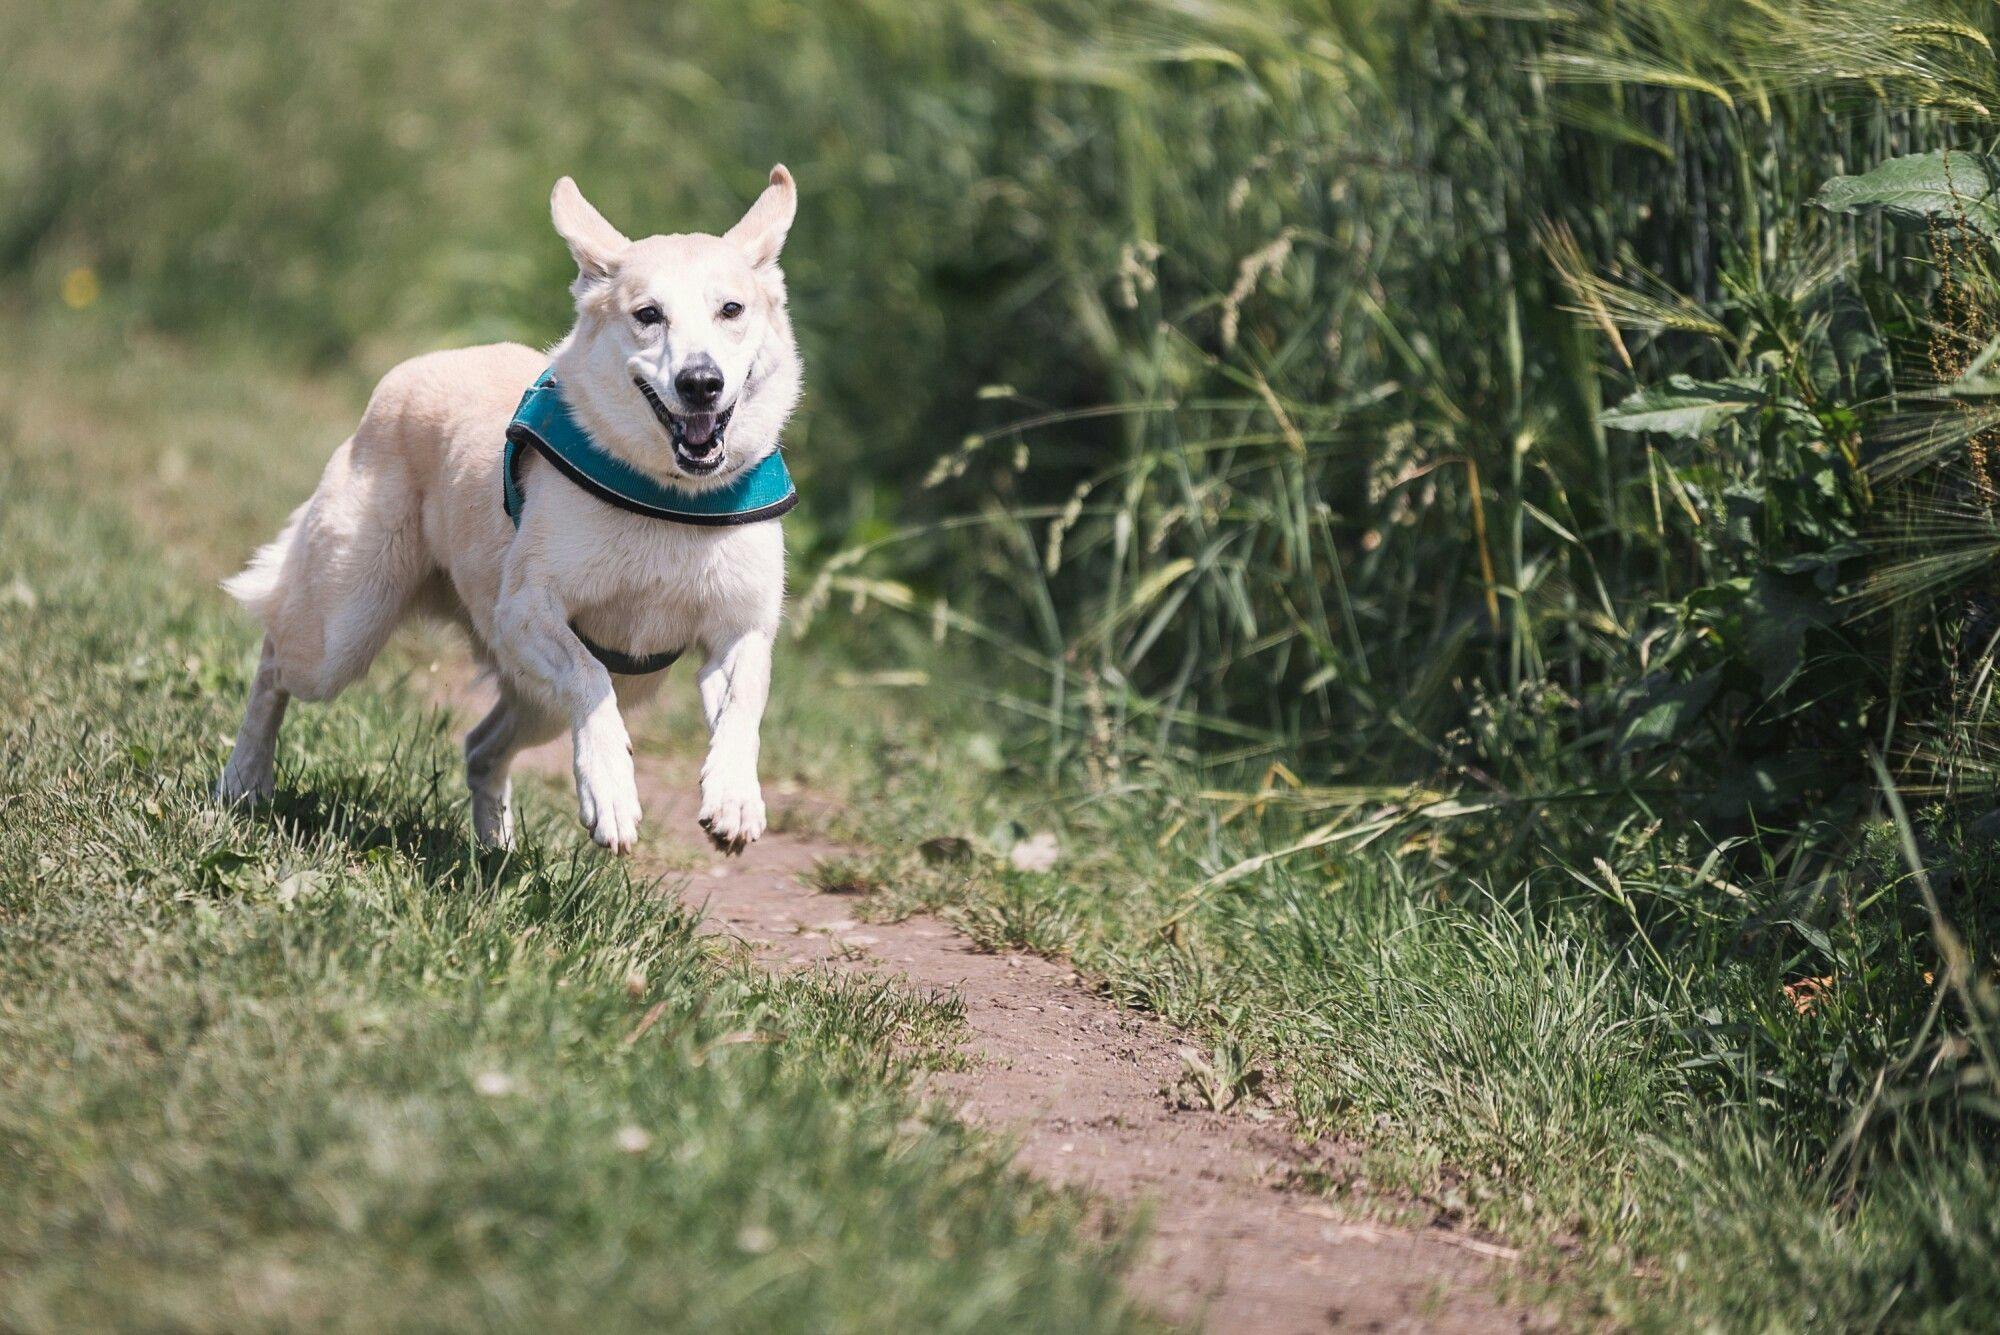 a white dog wearing a blue harness running at a park